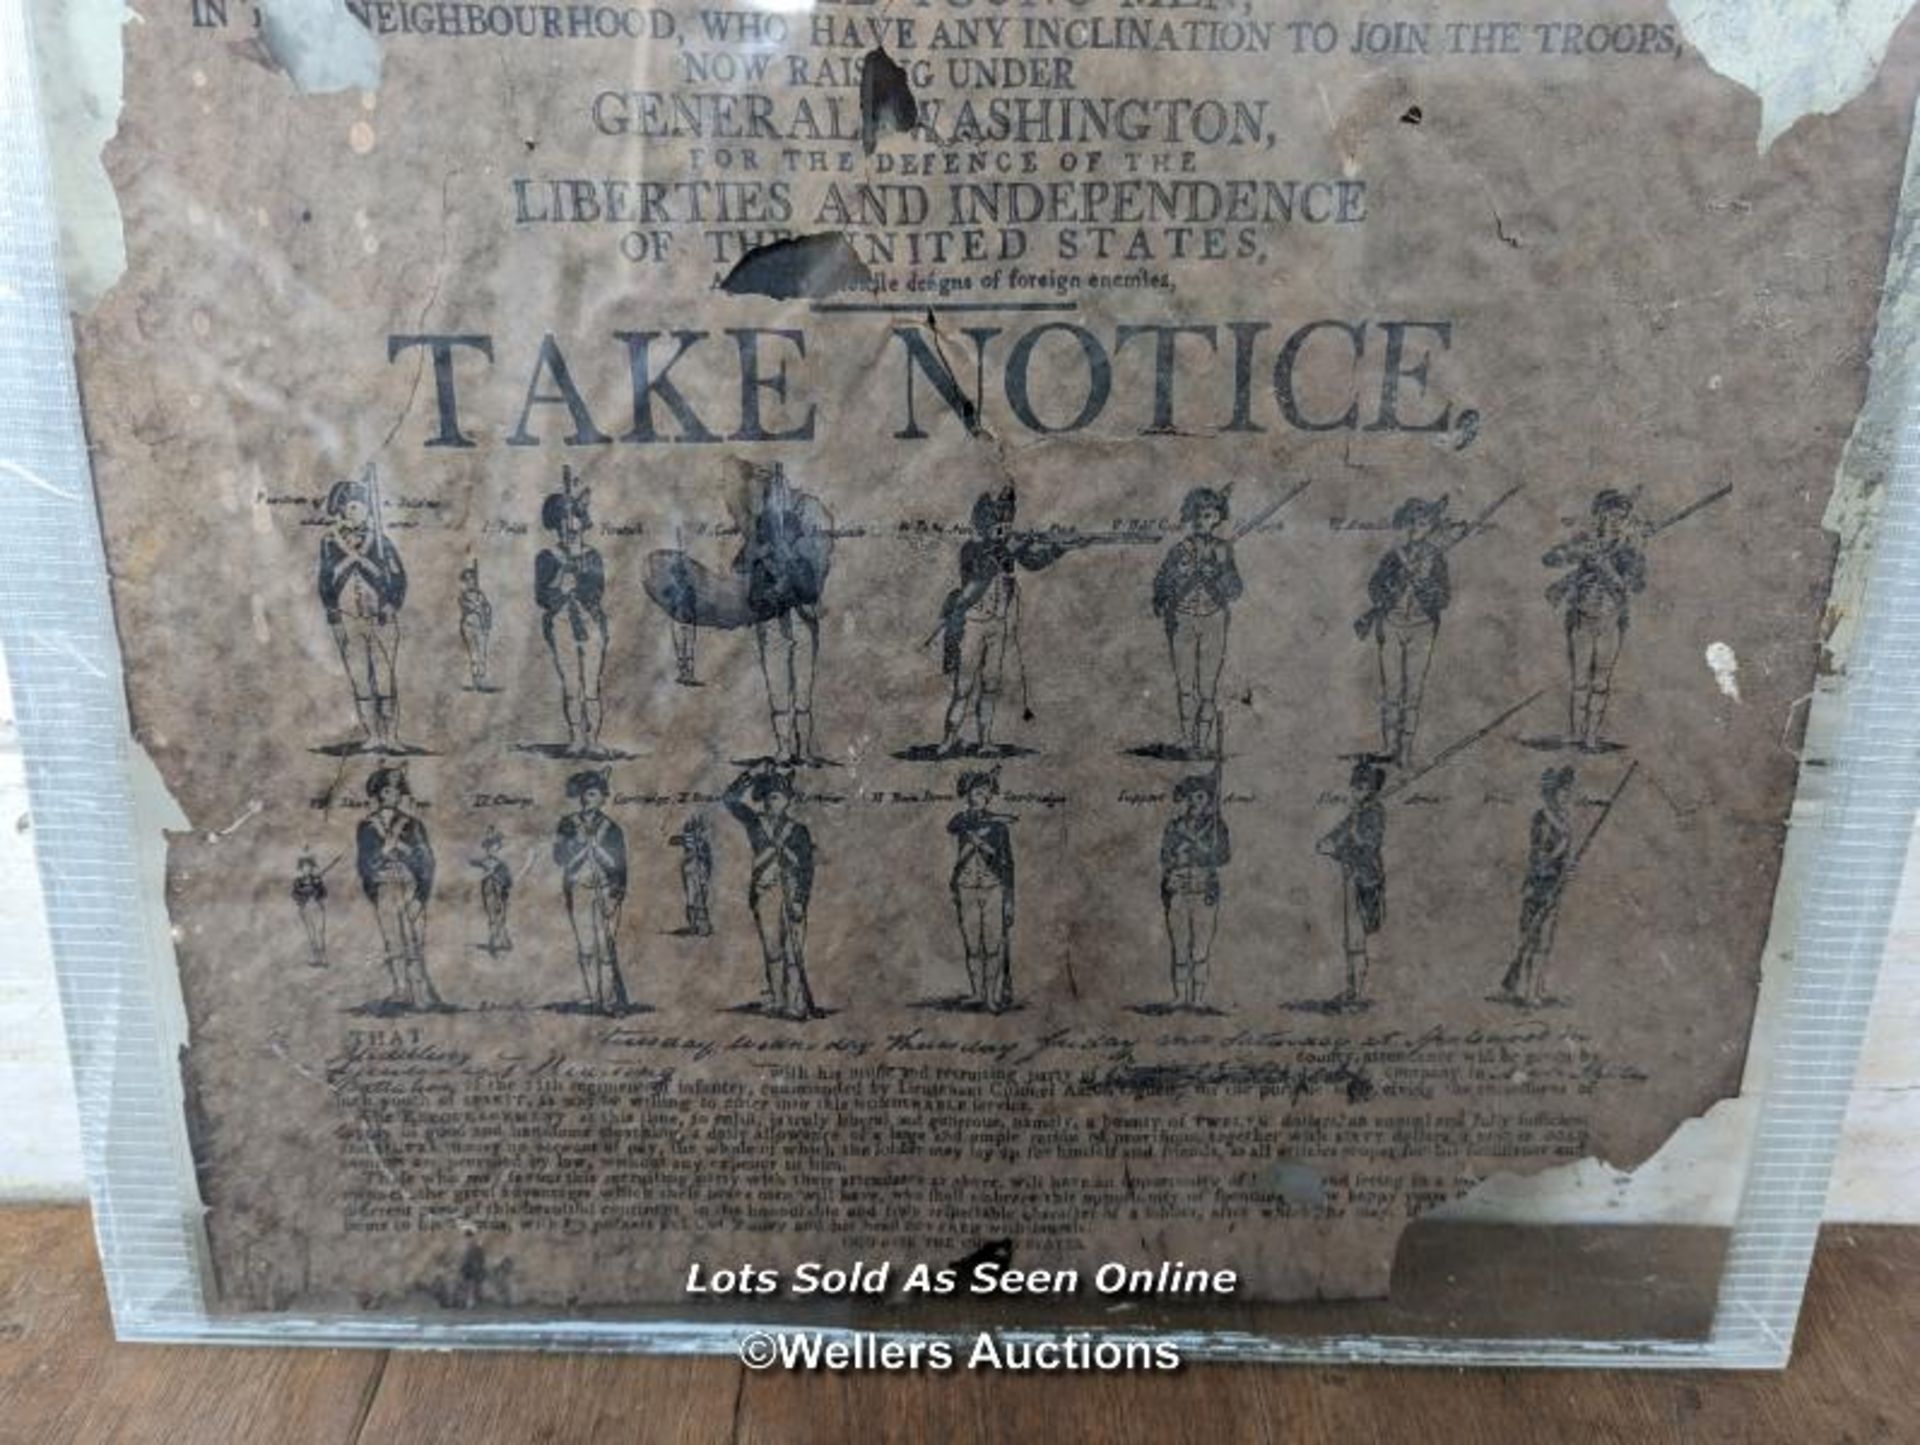 Possible USA War of independence or 1797 War vs French recruitment poster. Poor condition with